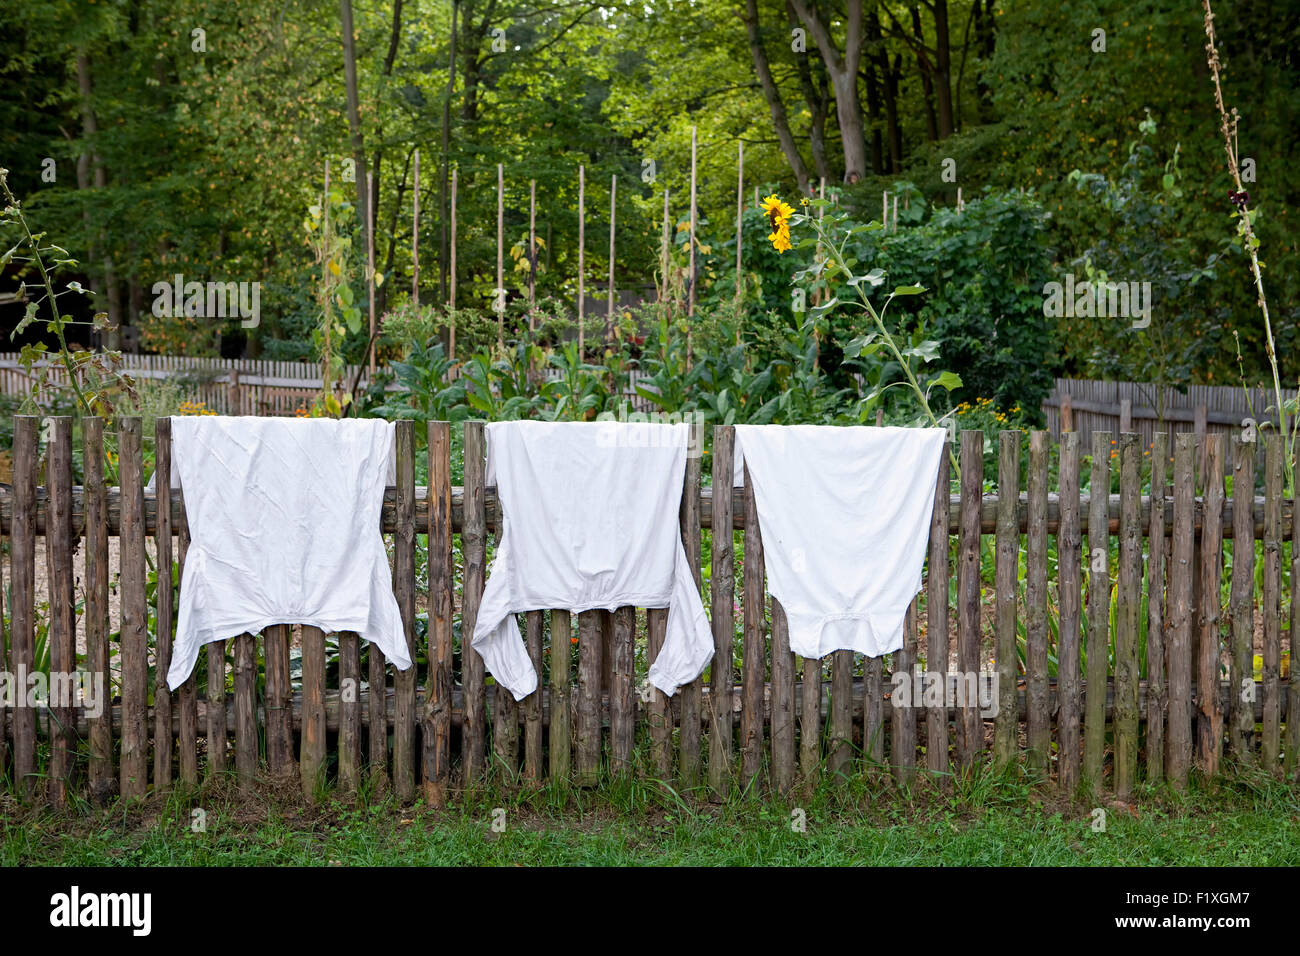 In front of a cottage garden white shirts hanging to dry on an old picket fence Stock Photo